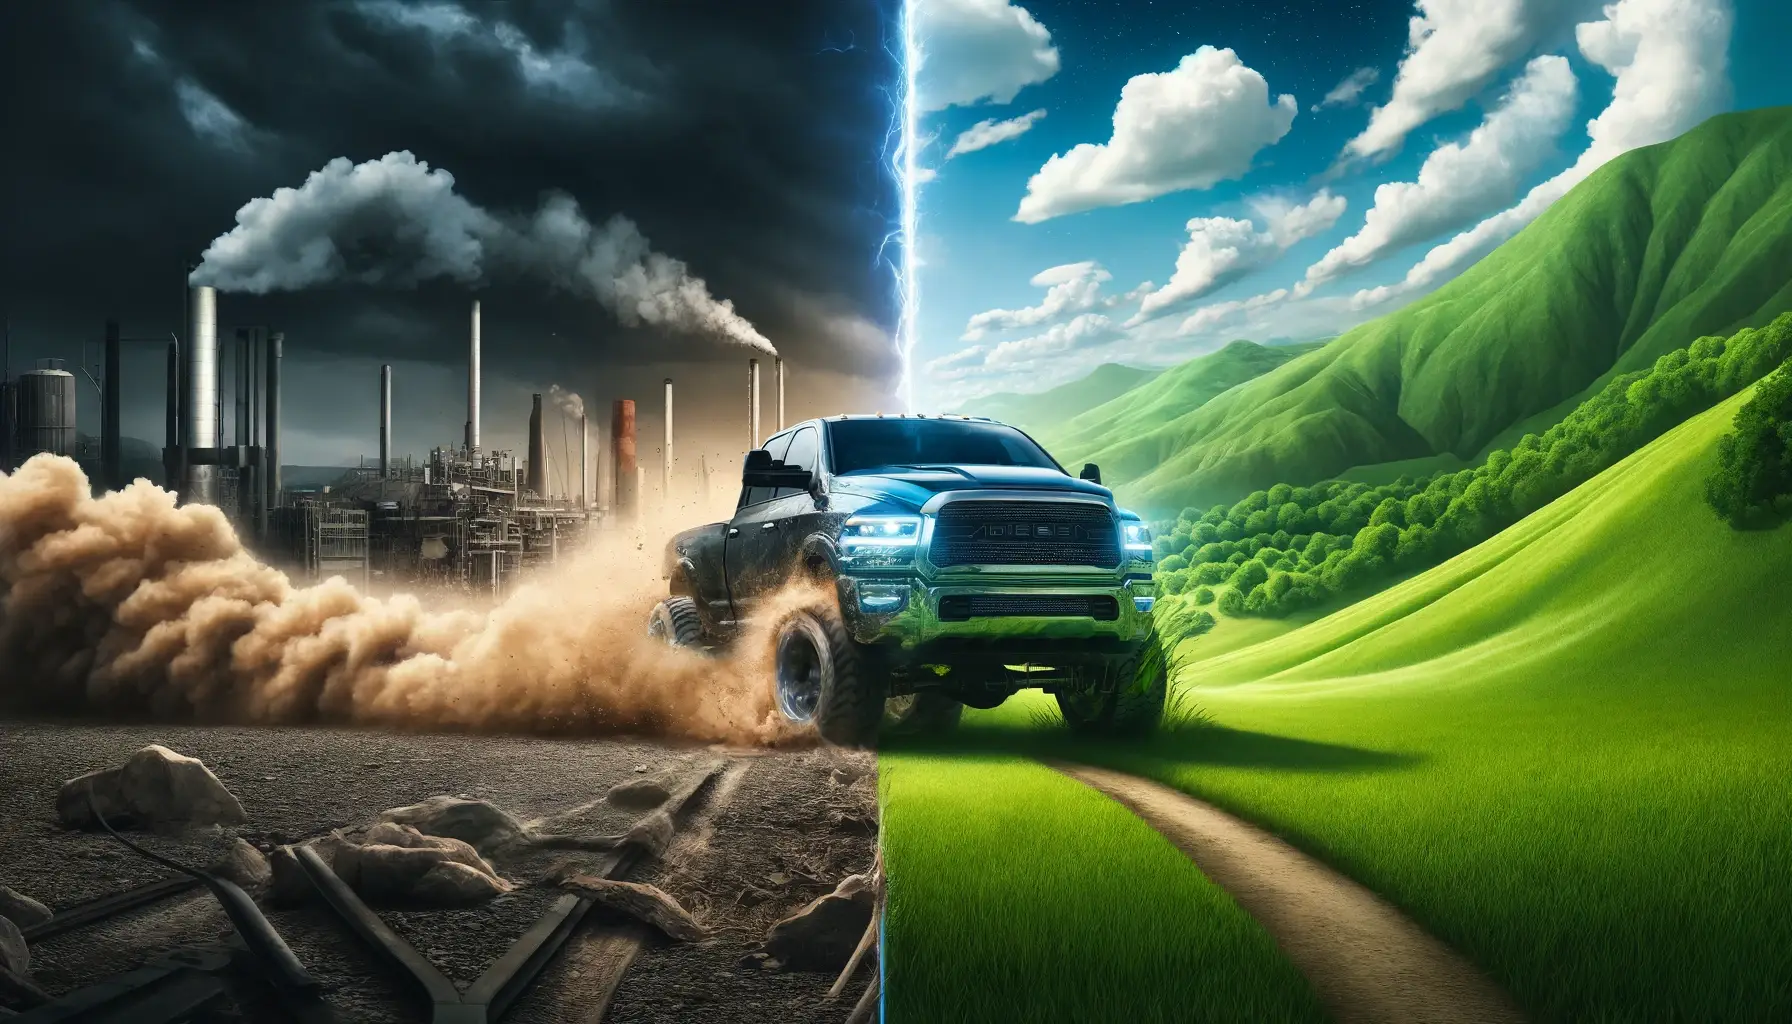 Revving Up Reality: The Impact and Innovation Behind Diesel Tuning